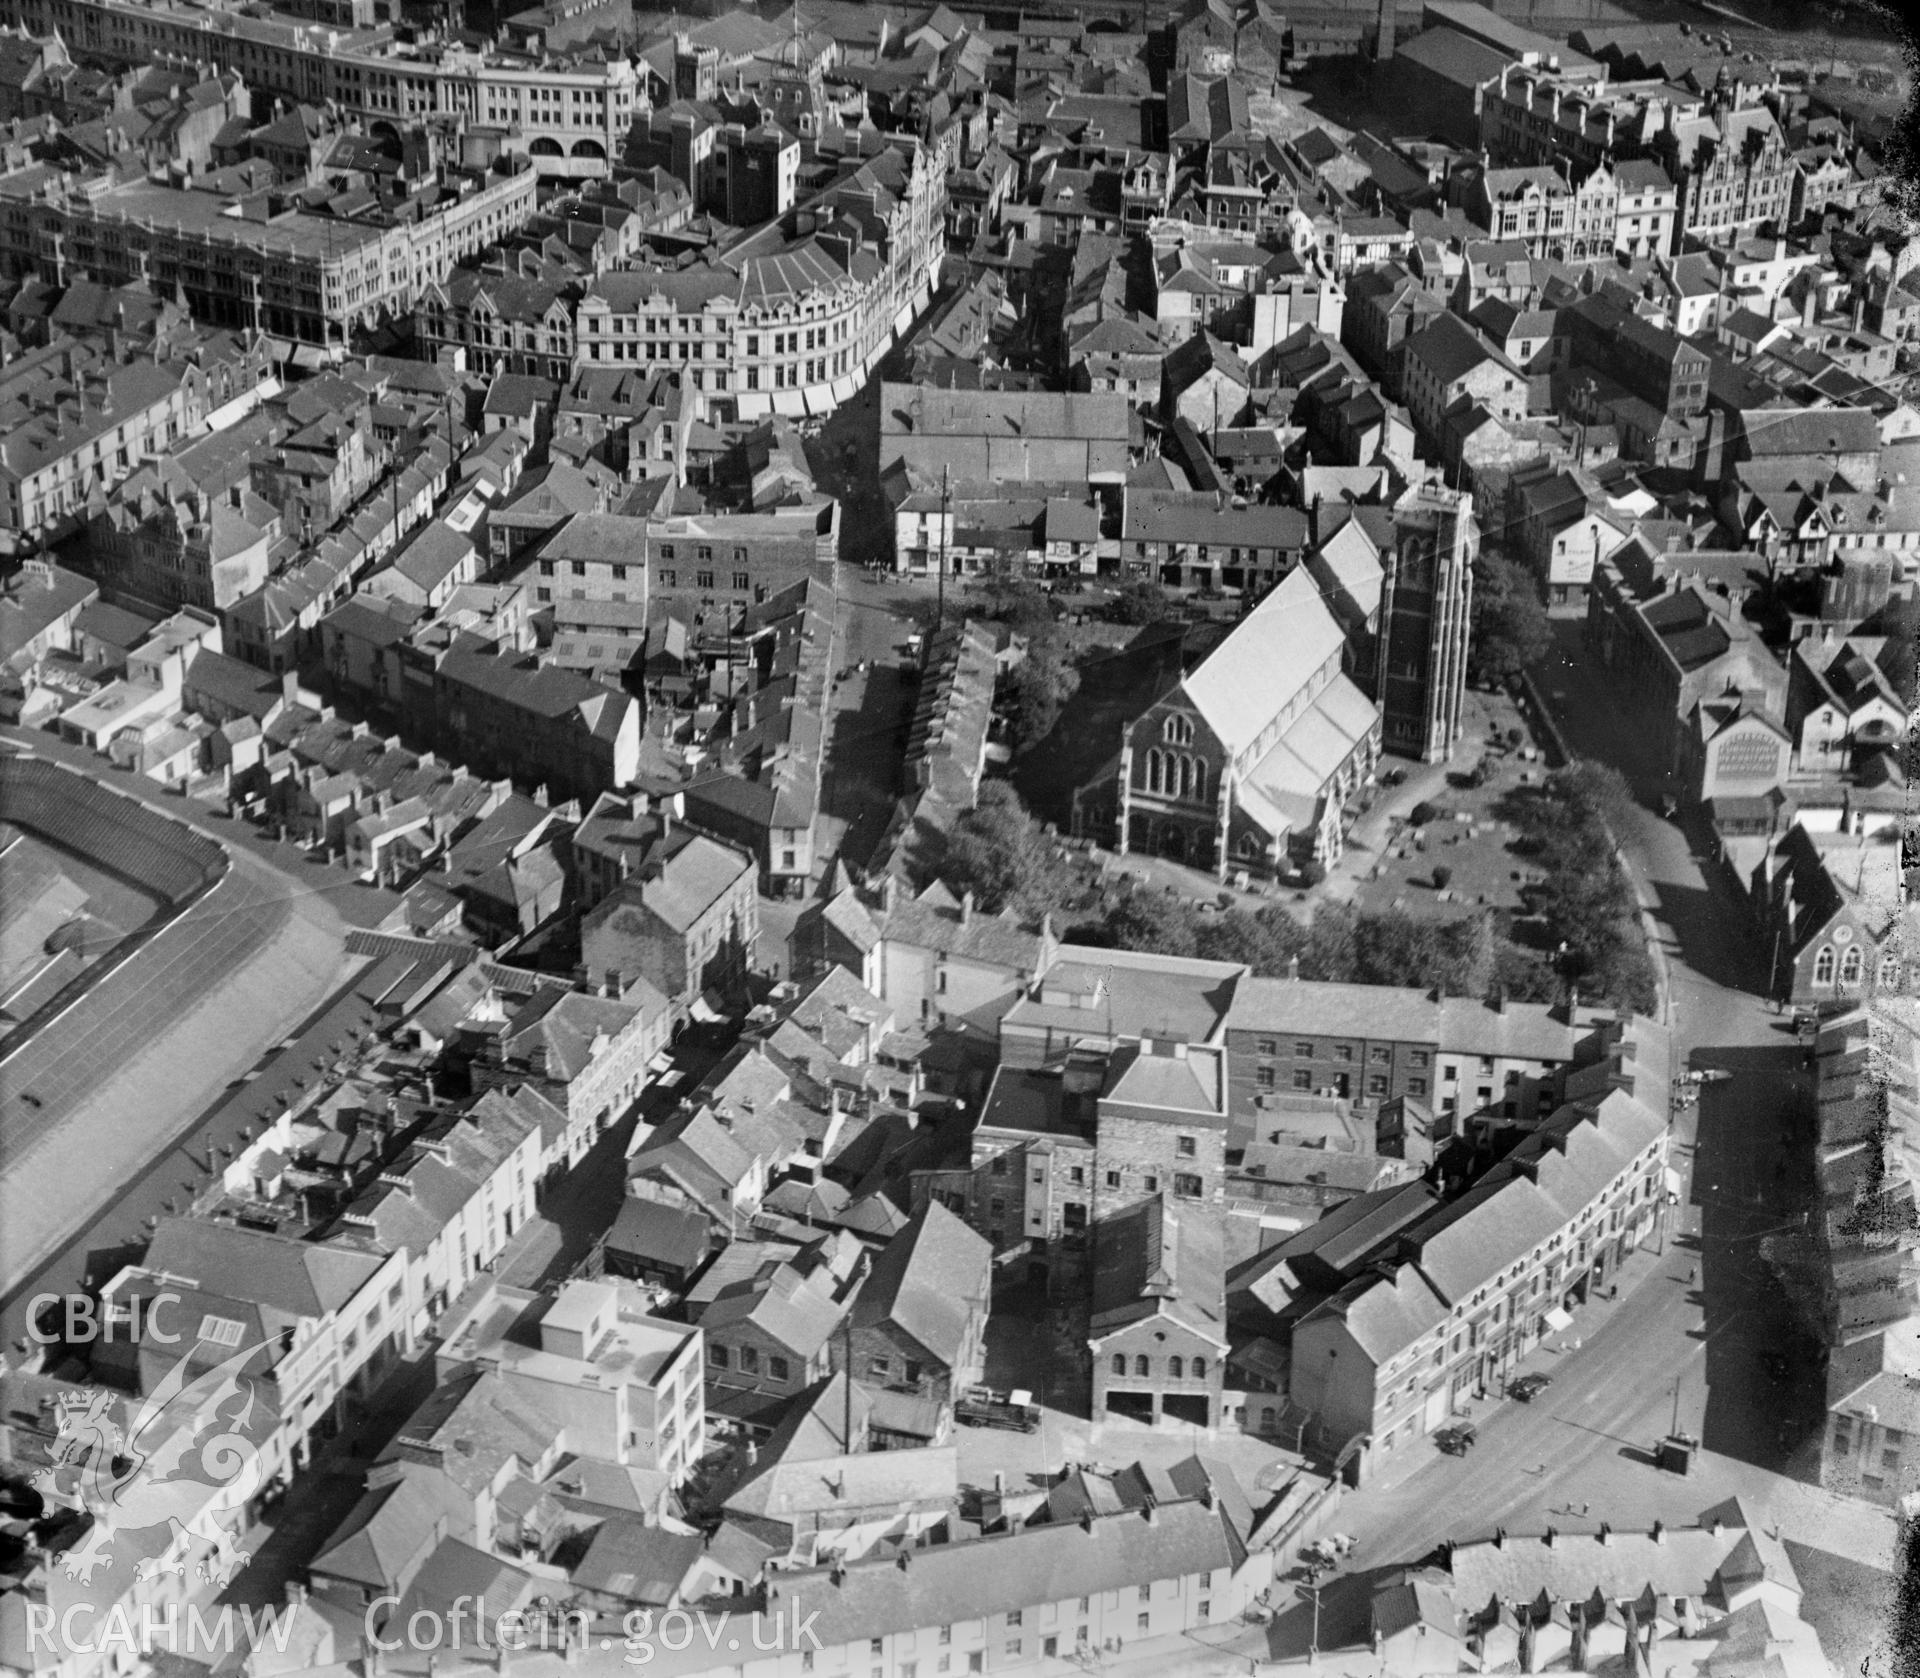 View of St Marys church, Swansea, oblique aerial view. 5?x4? black and white glass plate negative.